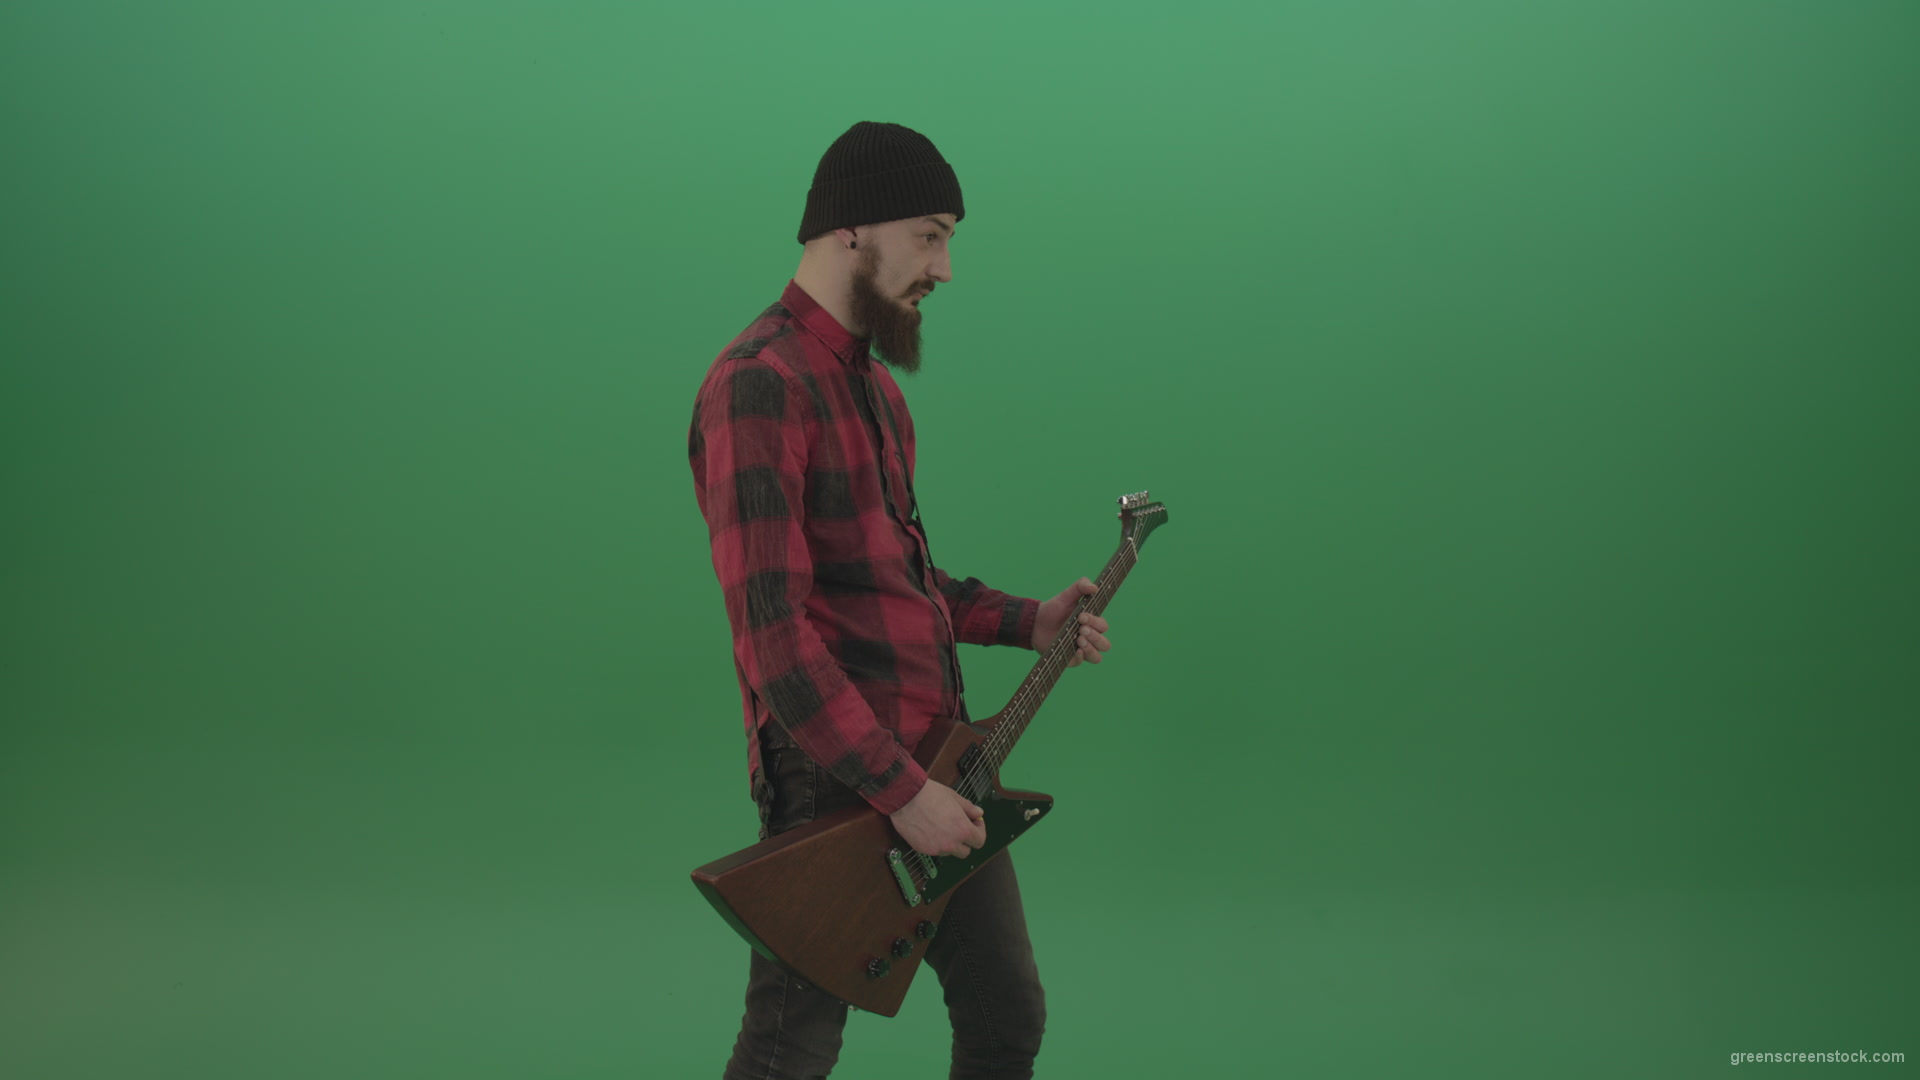 Young-man-with-beard-play-hardcore-music-on-guitar-in-side-view-on-green-screen-chromakey-background_001 Green Screen Stock